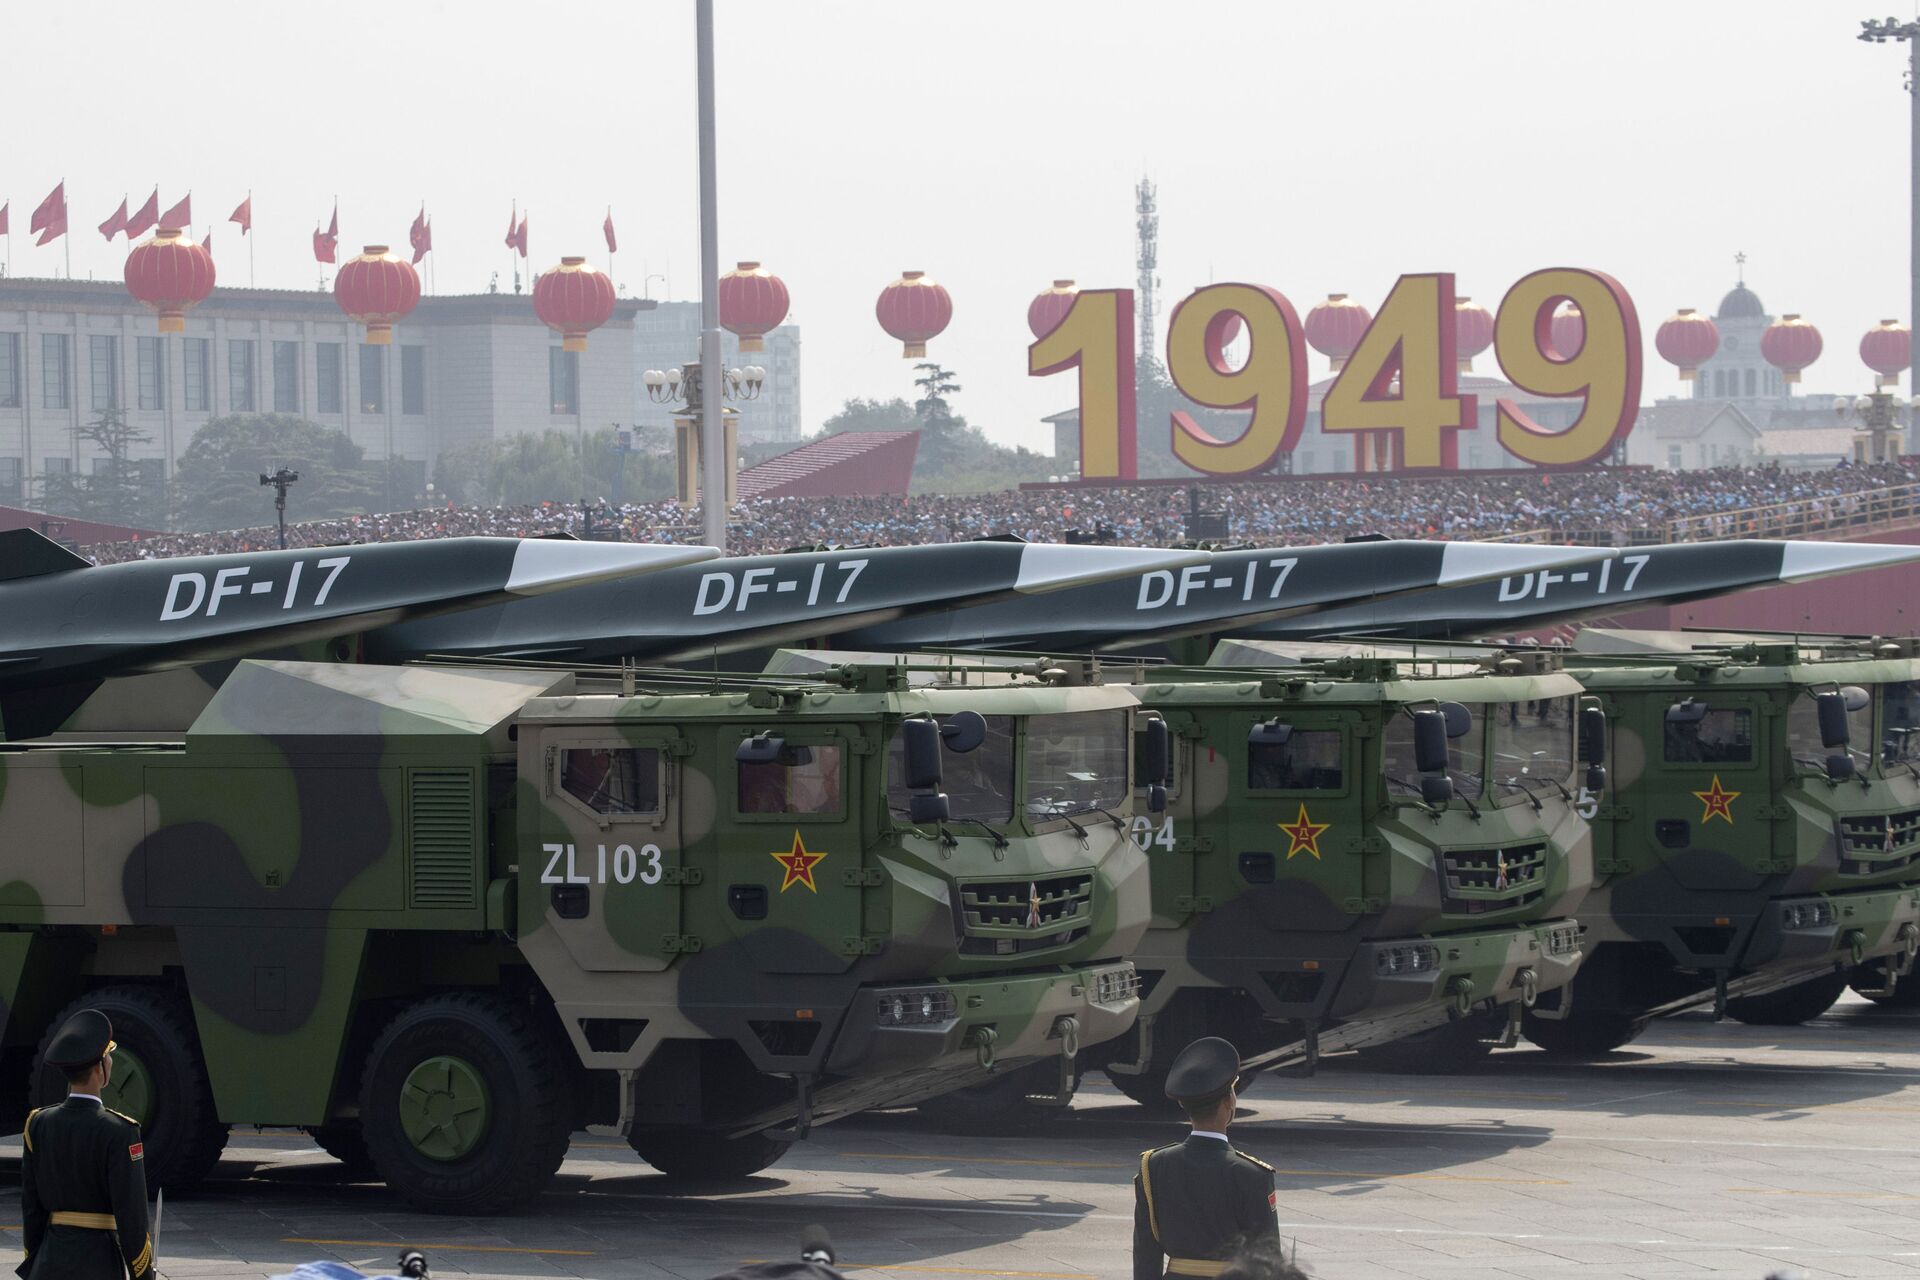 Chinese military vehicles carrying DF-17 roll during a parade to commemorate the 70th anniversary of the founding of Communist China in Beijing, Tuesday, Oct. 1, 2019.  - Sputnik International, 1920, 30.10.2021